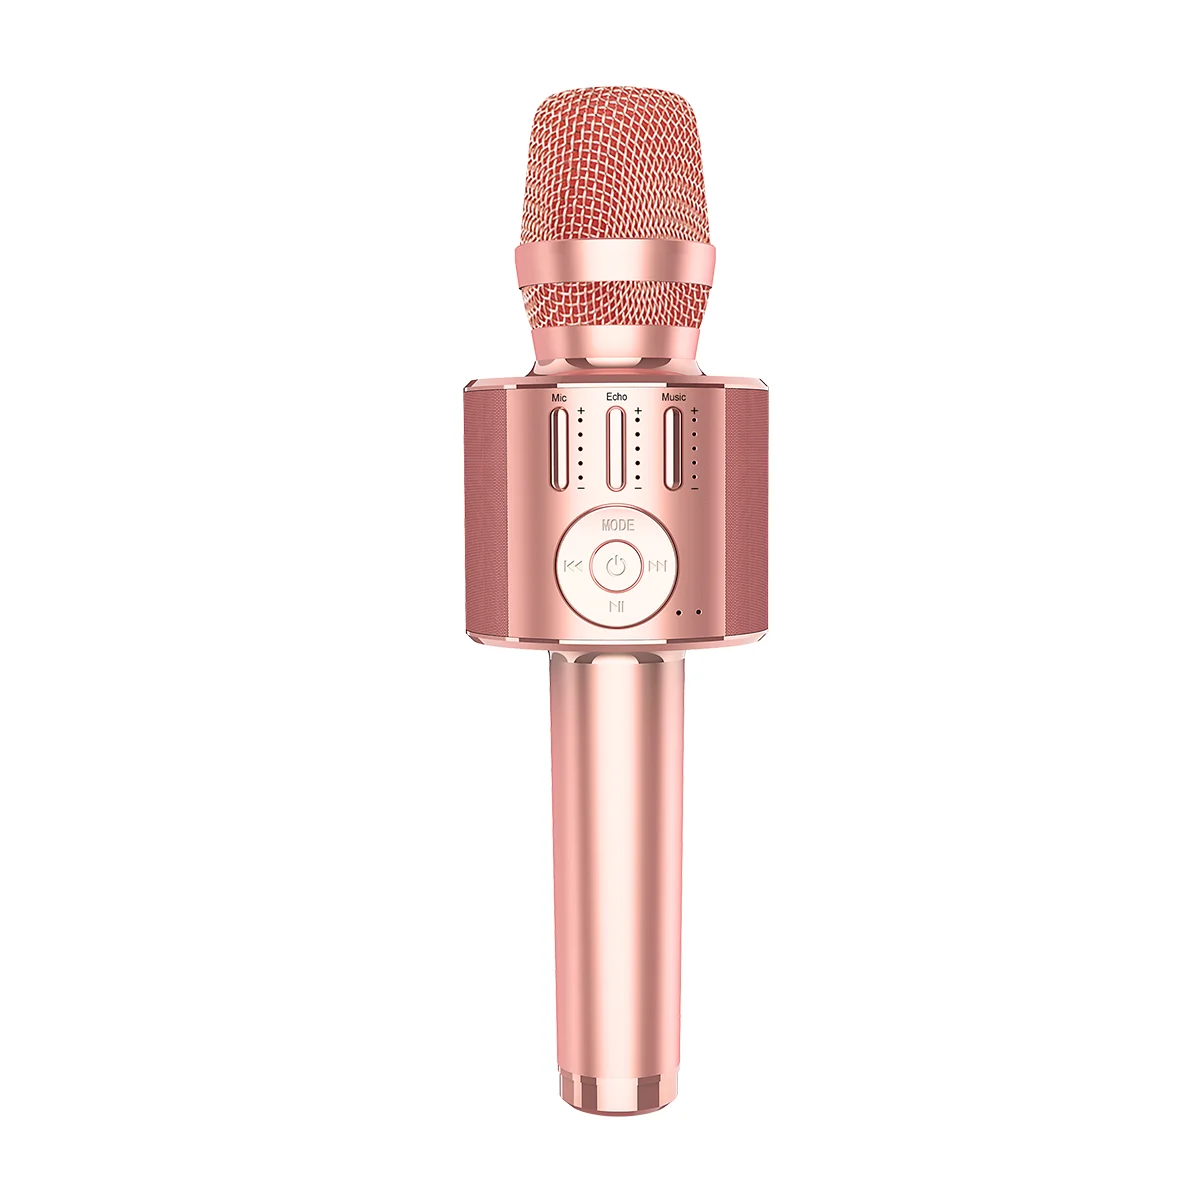 

Best Selling Family KTV Mic Portable Gold Wireless Professional Karaoke Microphone Mini USB Handheld for Bluetooths Mike